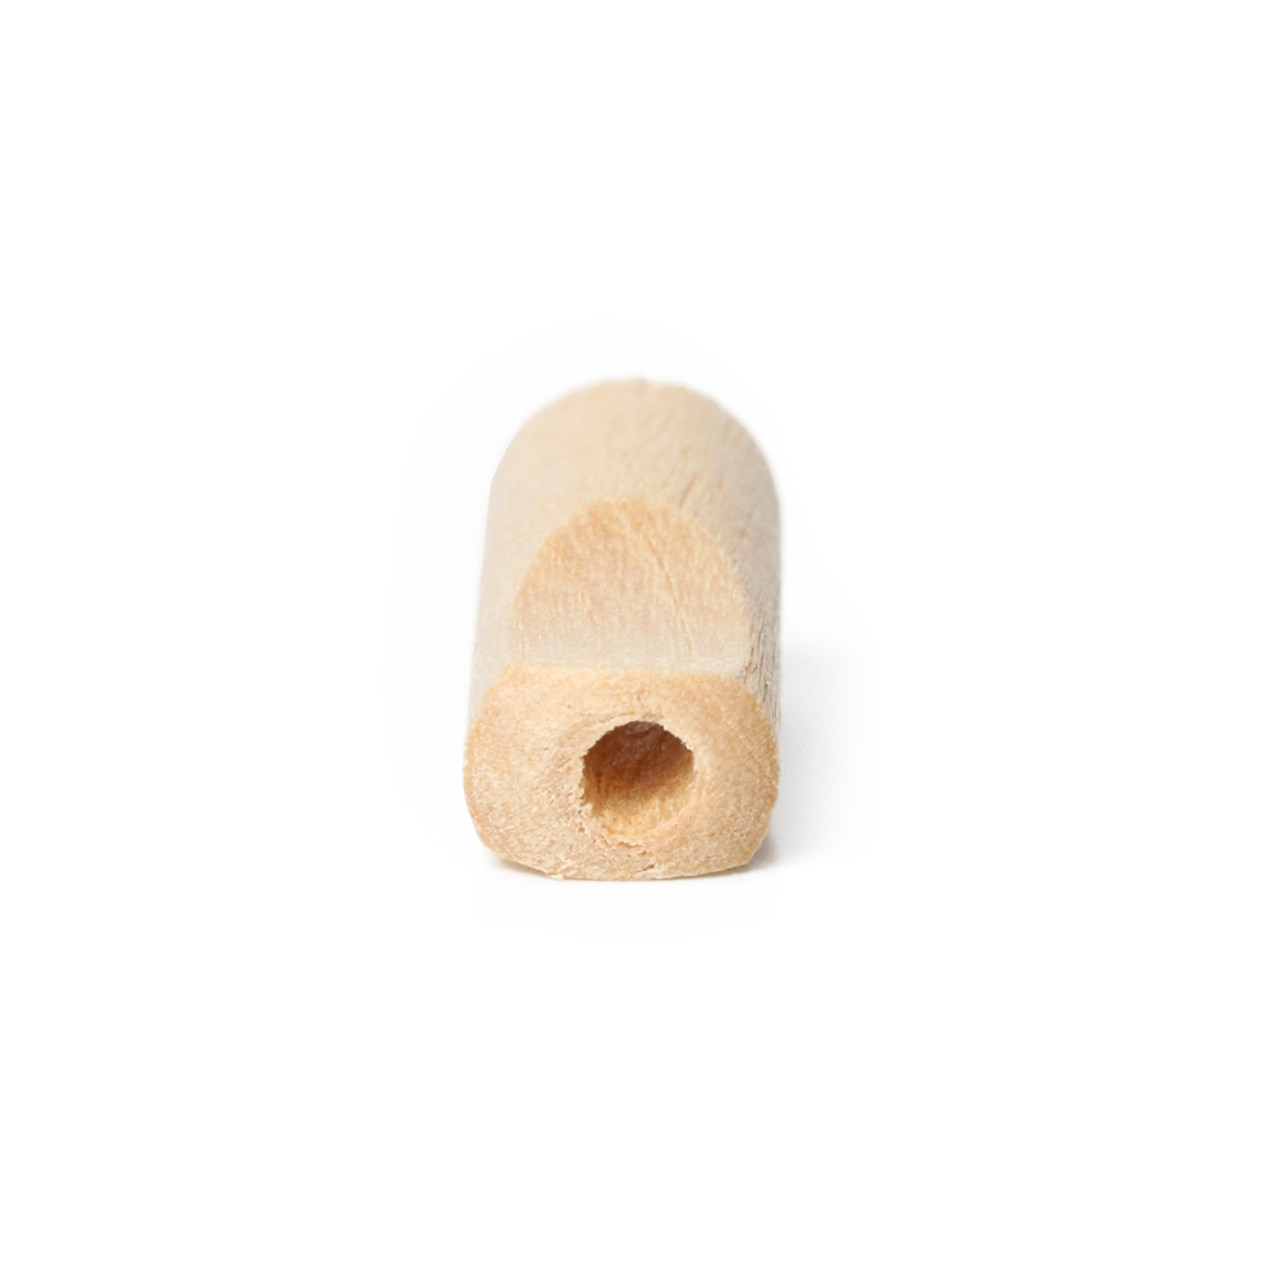 Wood Filter Tips for Joints / Blunts / Cannagars - 11mm diameter x 38.6mm  long - 100 per case